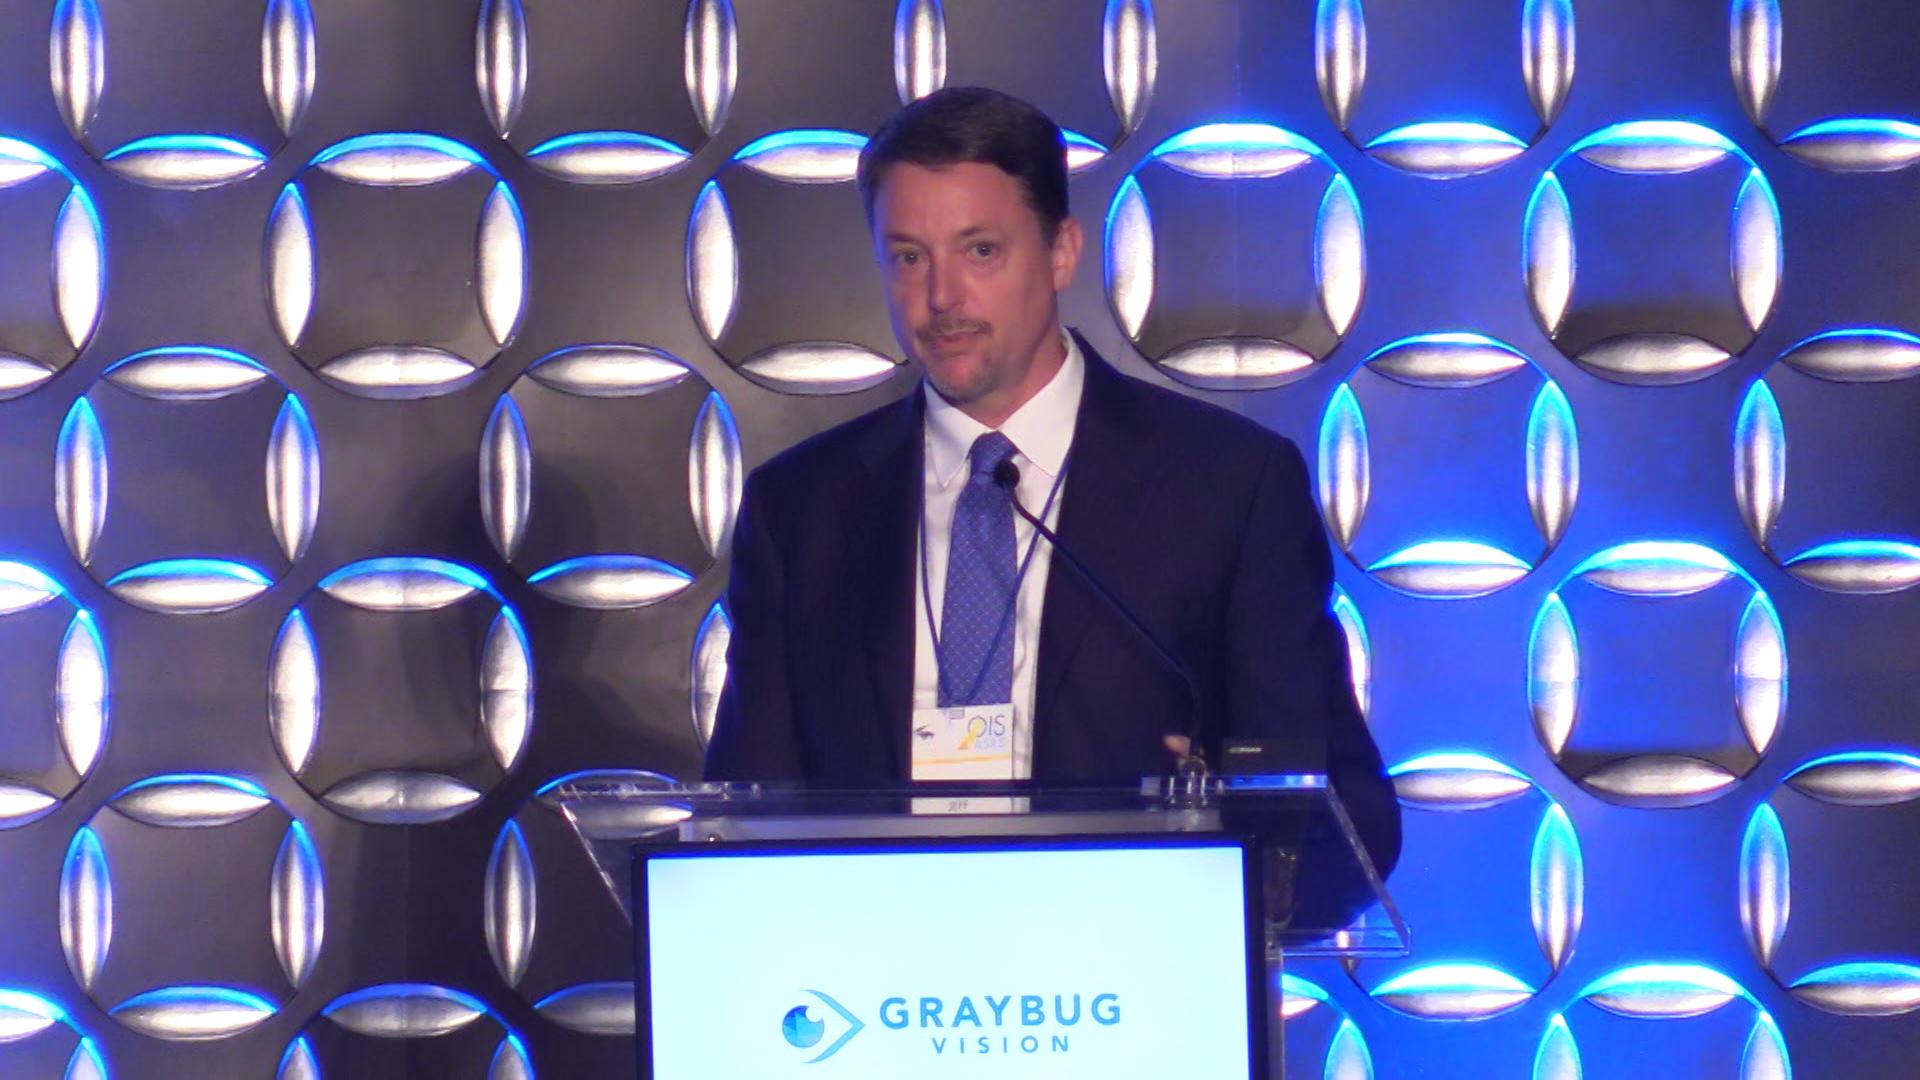 Graybug Moves Forward on GB-102 Ascending-Dose Trial